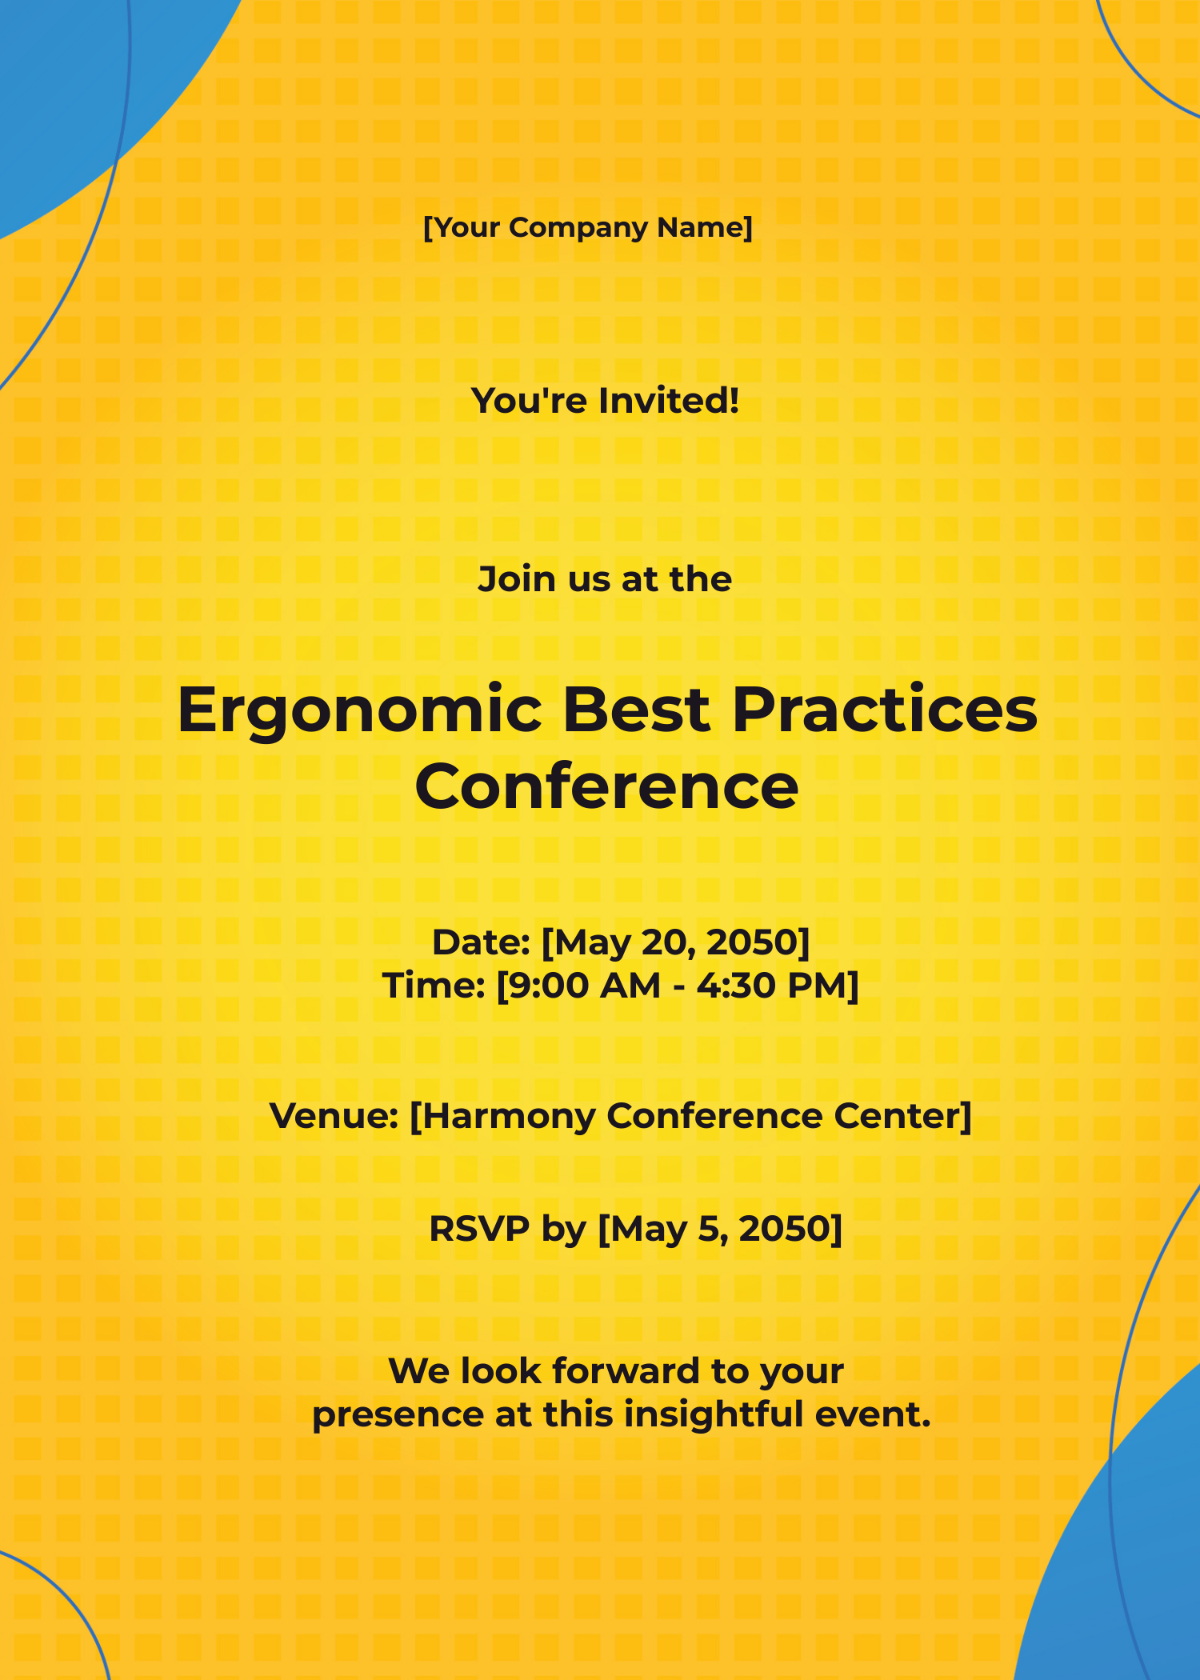 Ergonomic Best Practices Conference Invitation Card Template